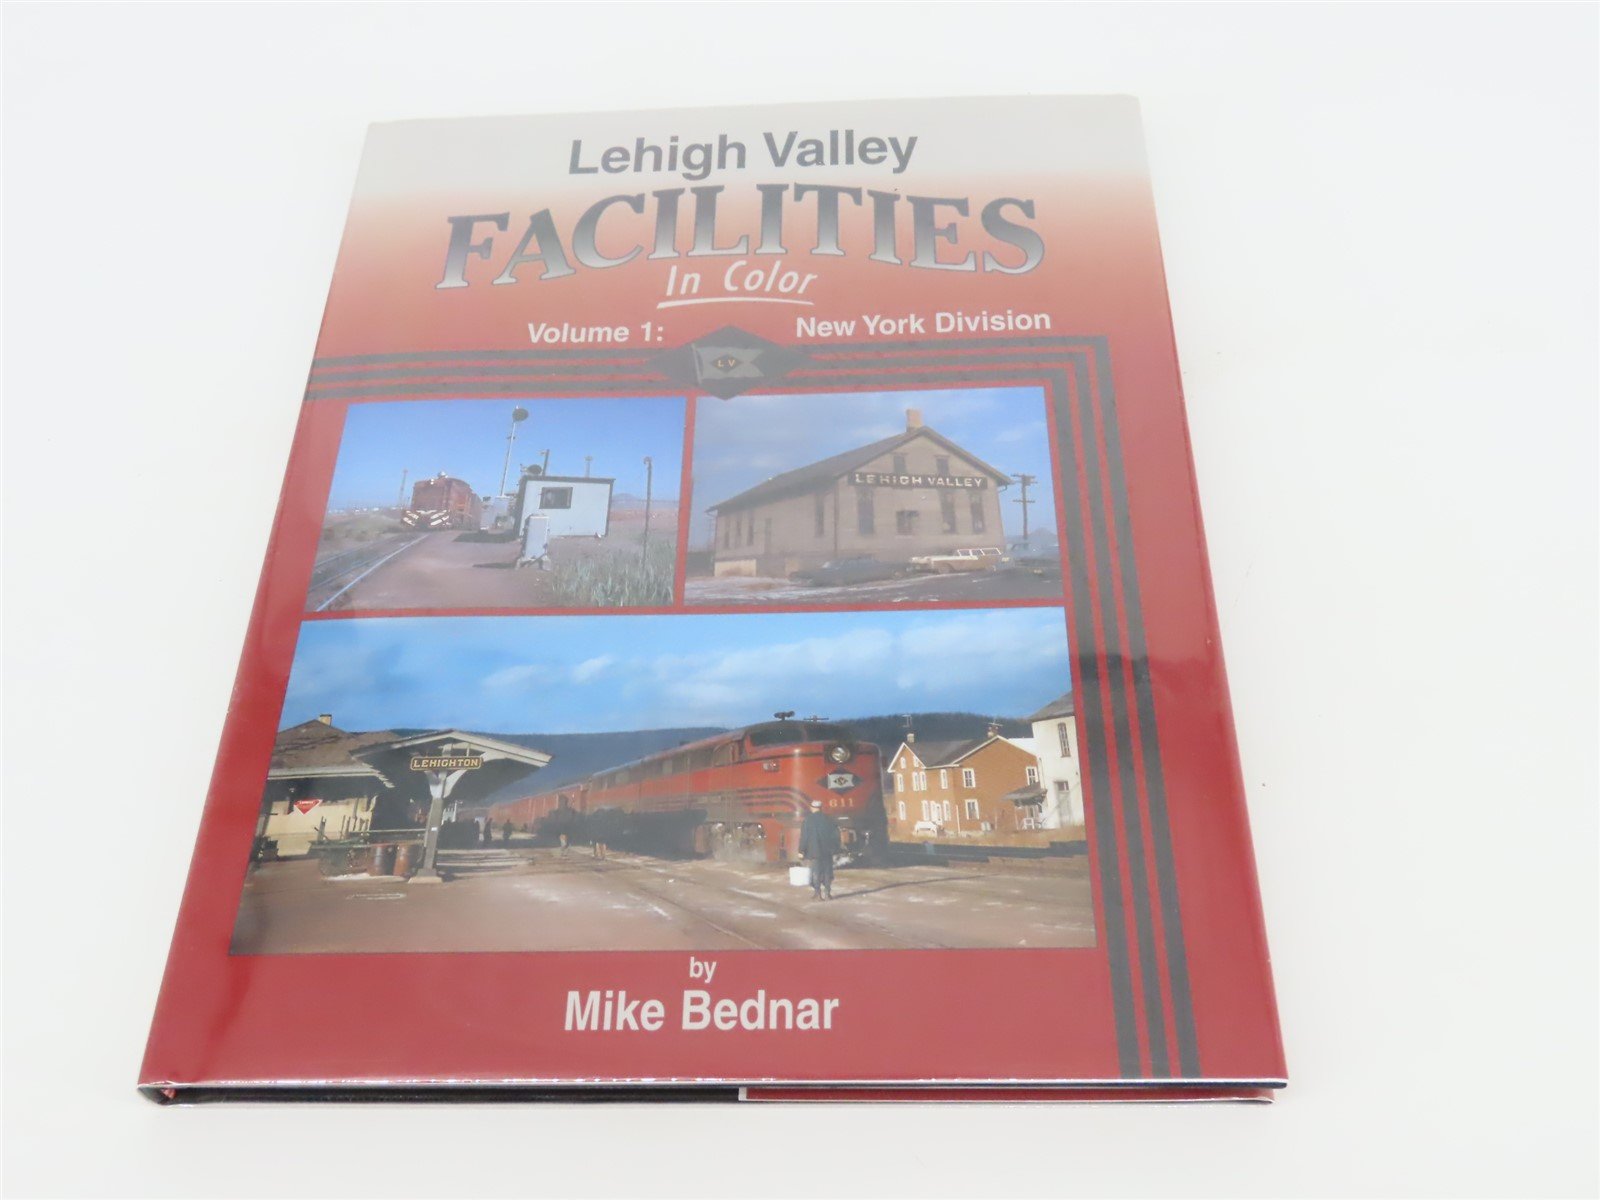 Morning Sun: Lehigh Valley Facilities Volume 1 by Mike Bednar ©2008 HC Book